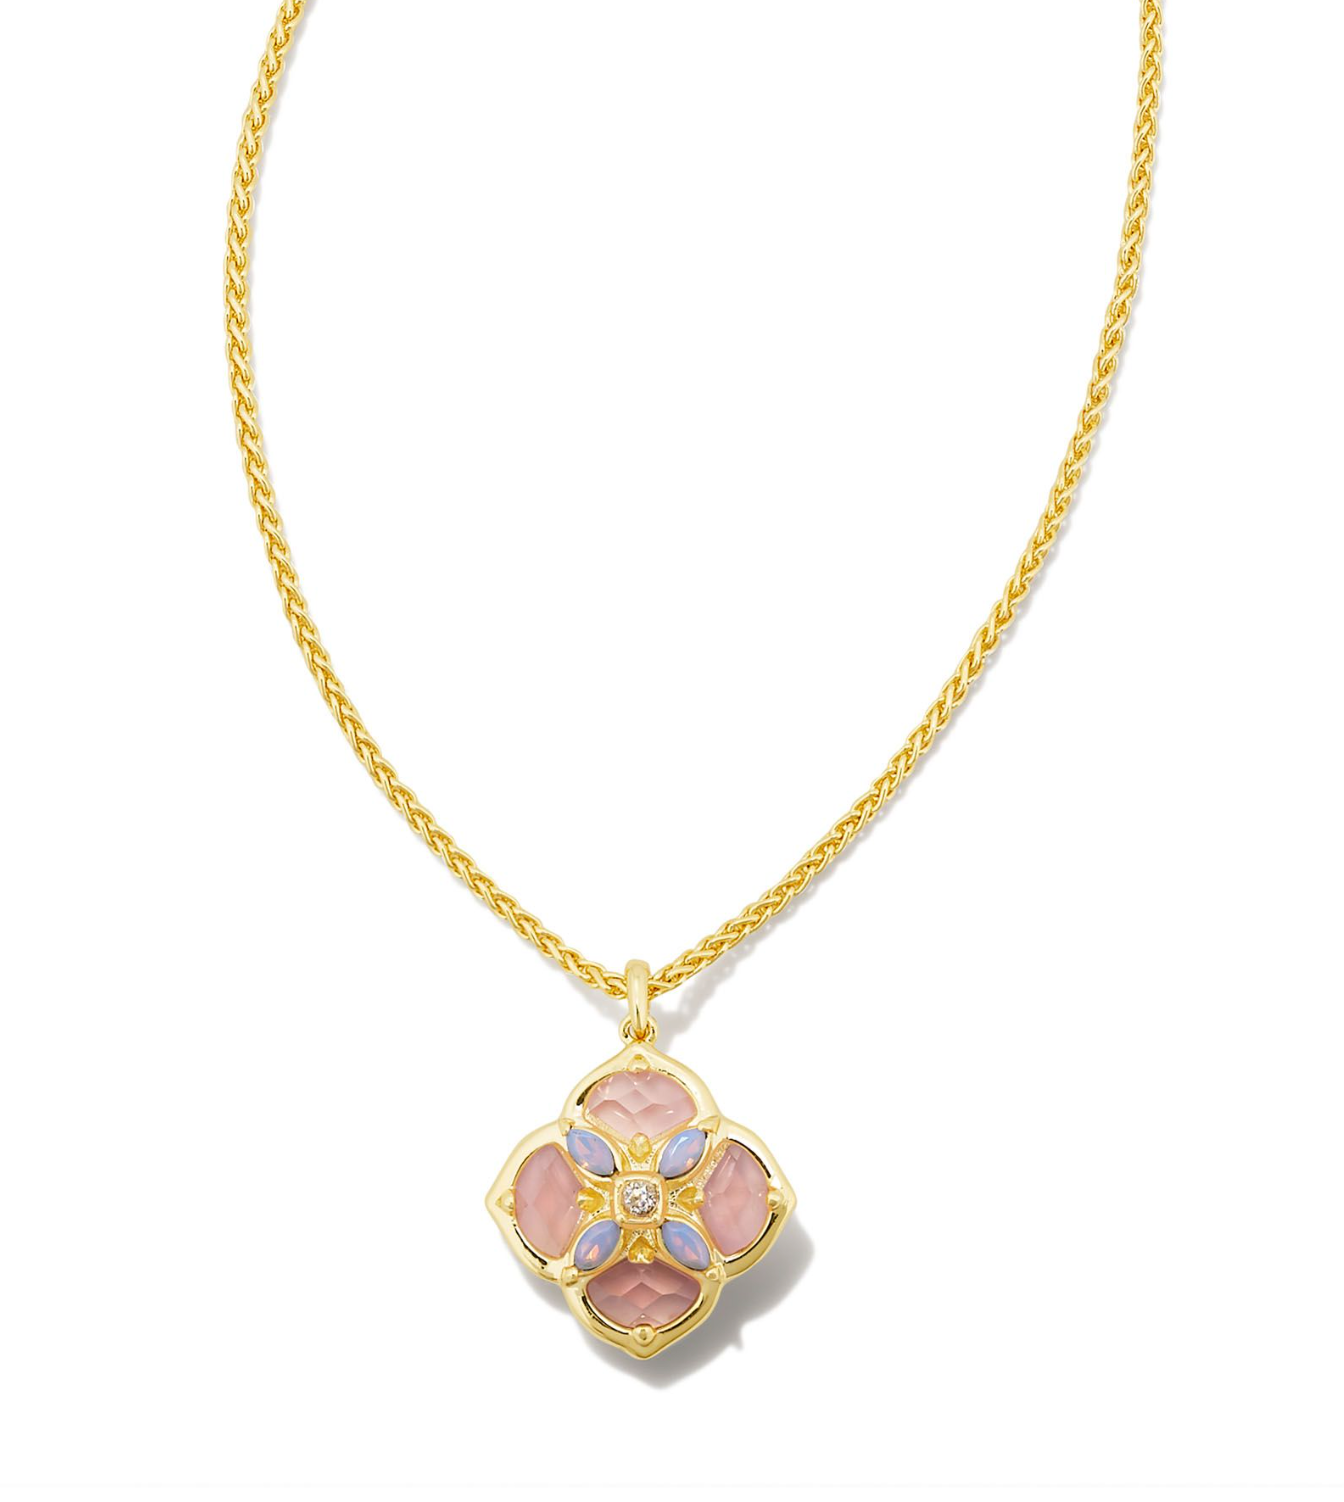 KENDRA SCOTT Dira Stone Gold Short Pendant Necklace in Pink Mix - The Street Boutique 